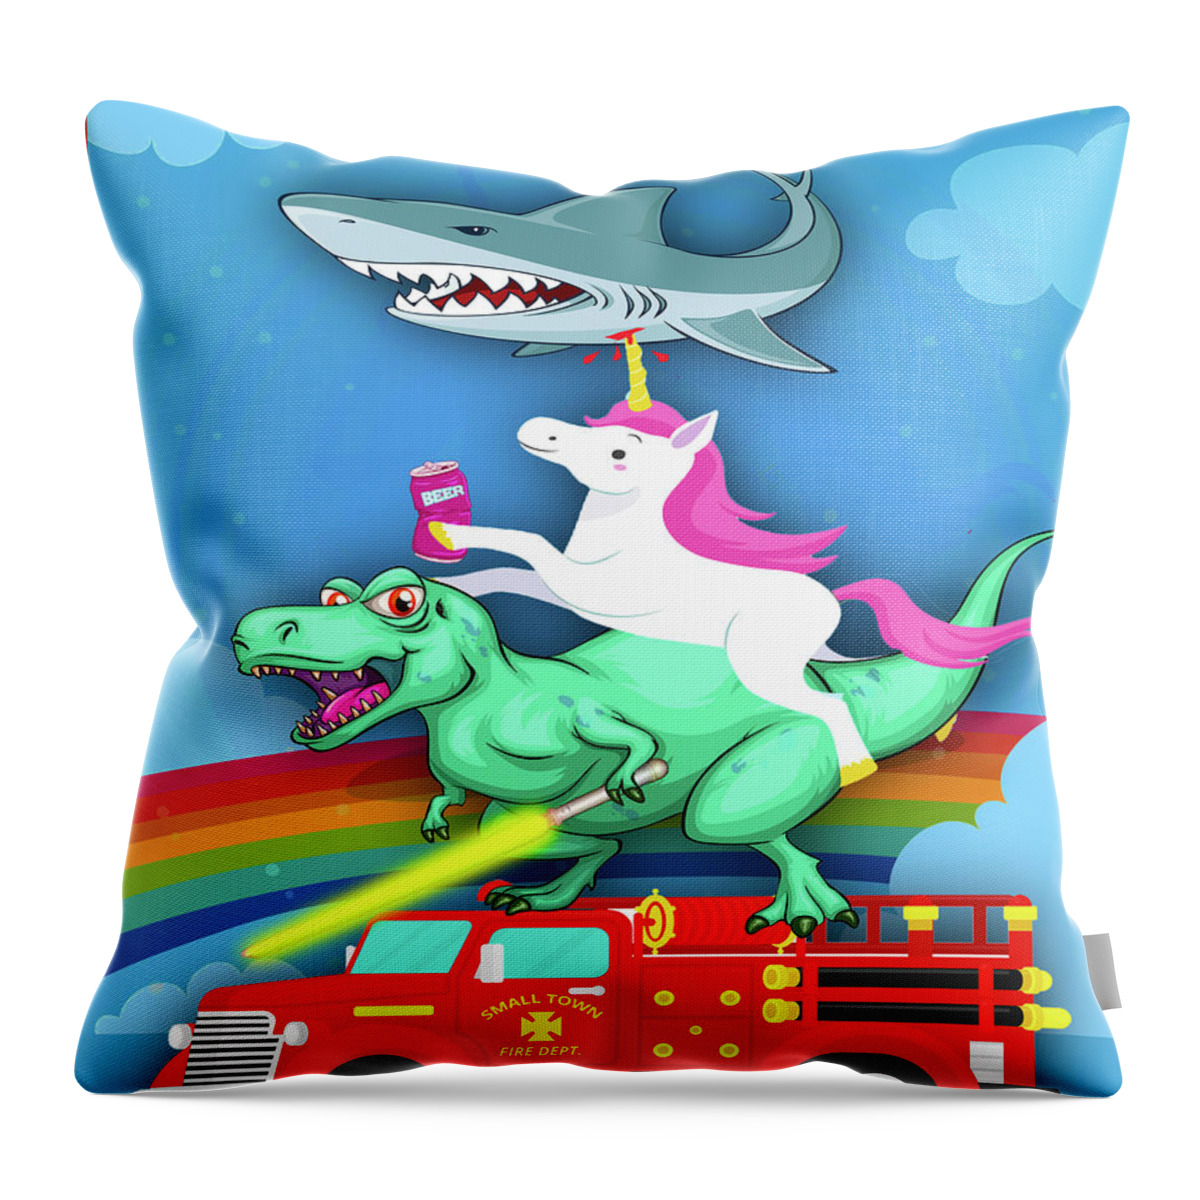 Unicorn Throw Pillow featuring the painting Super Terrific Freakin Awesome by Tony Rubino